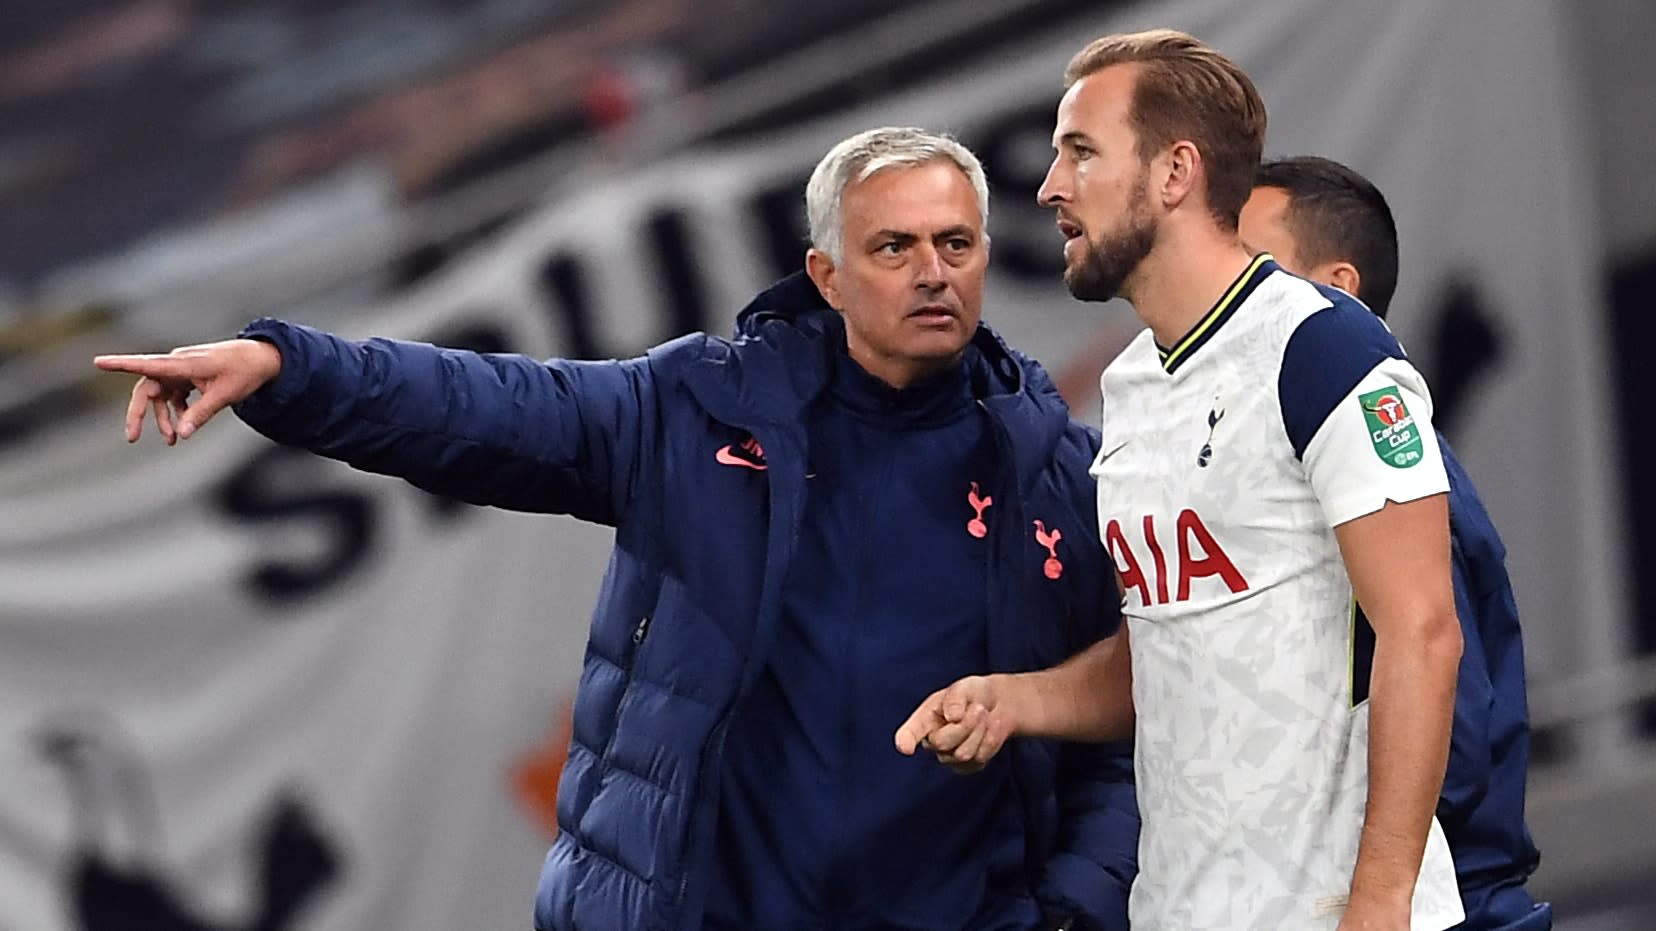 Jose Mourinho continues sparring with 'Gary' Southgate over Harry Kane plans